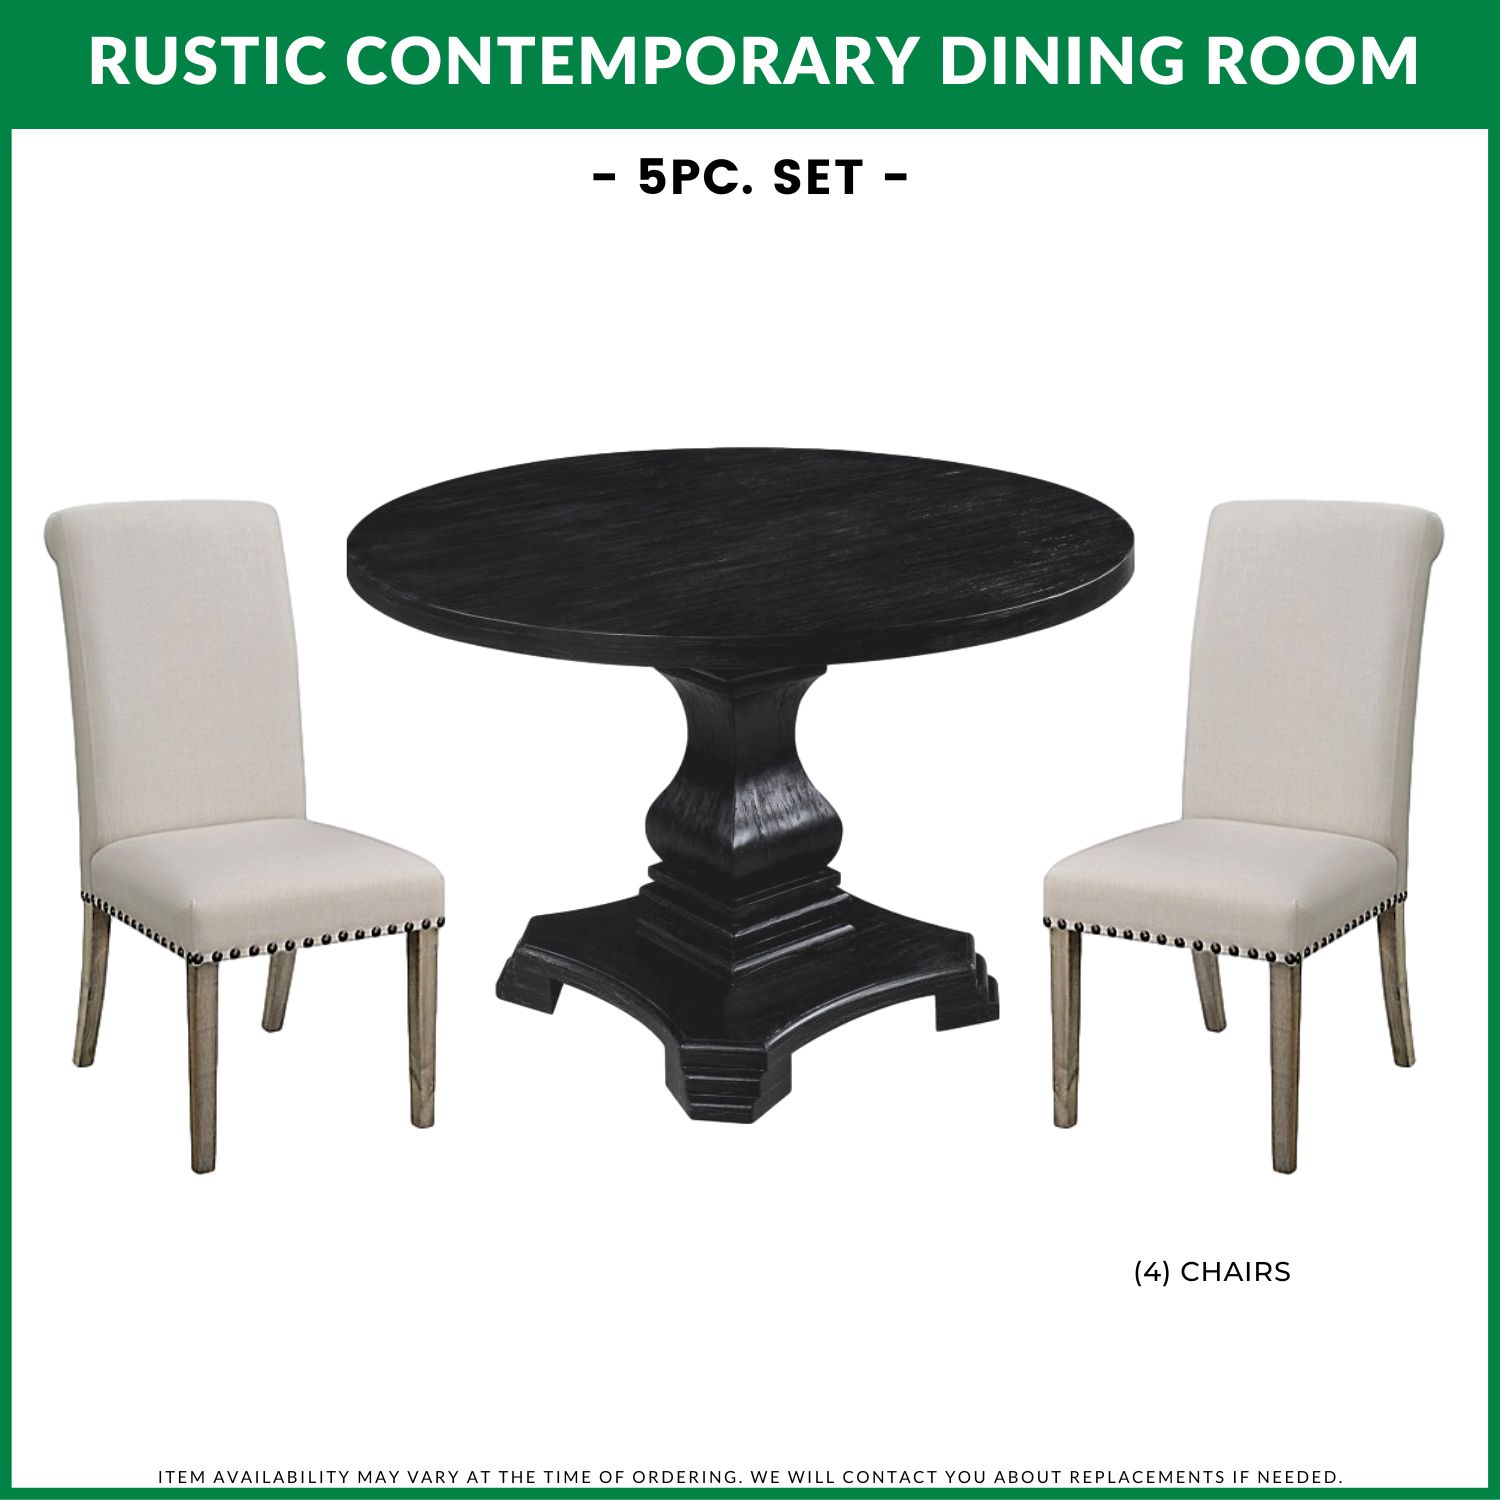 Rustic Contemporary Dining Room - 5 Pc Set